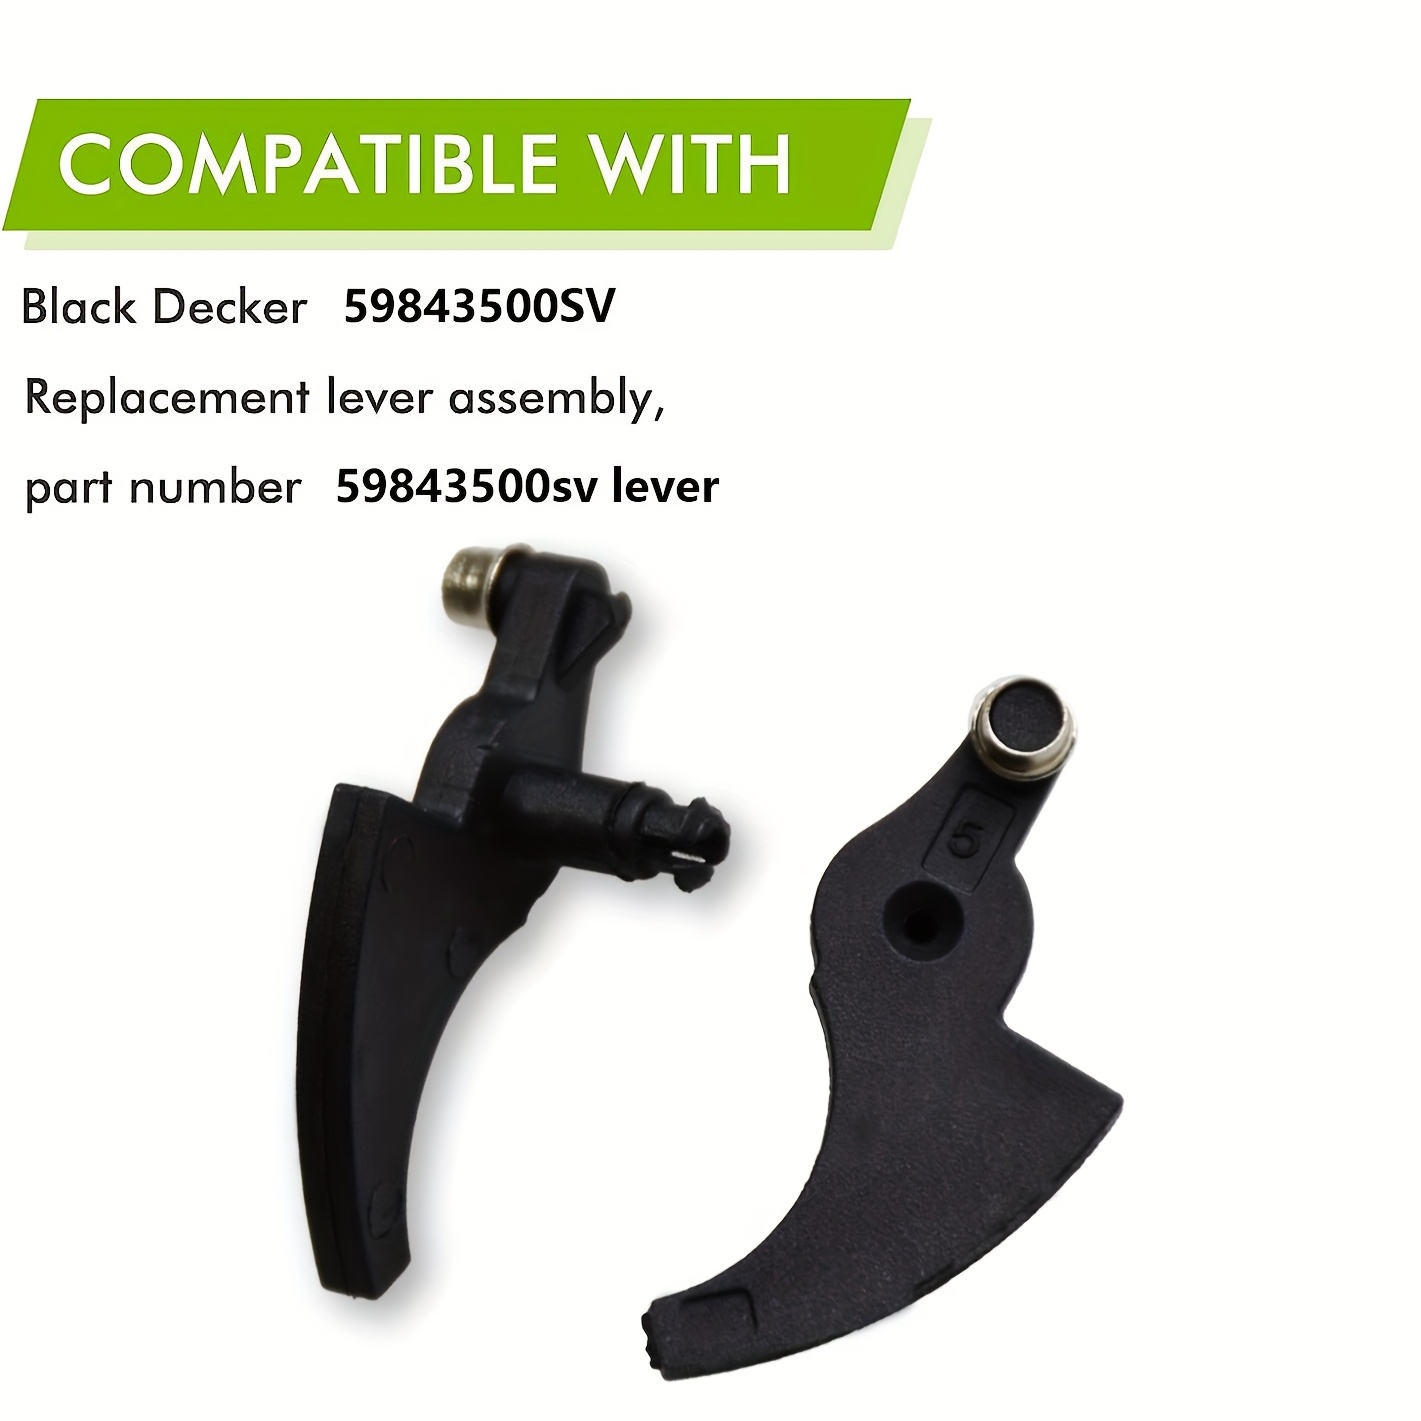 2 Packs Black & Decker NST2118 LST220 LST136 Trimmer Replacement Lever  Assembly # 90567077 Works With Black And Decker Products